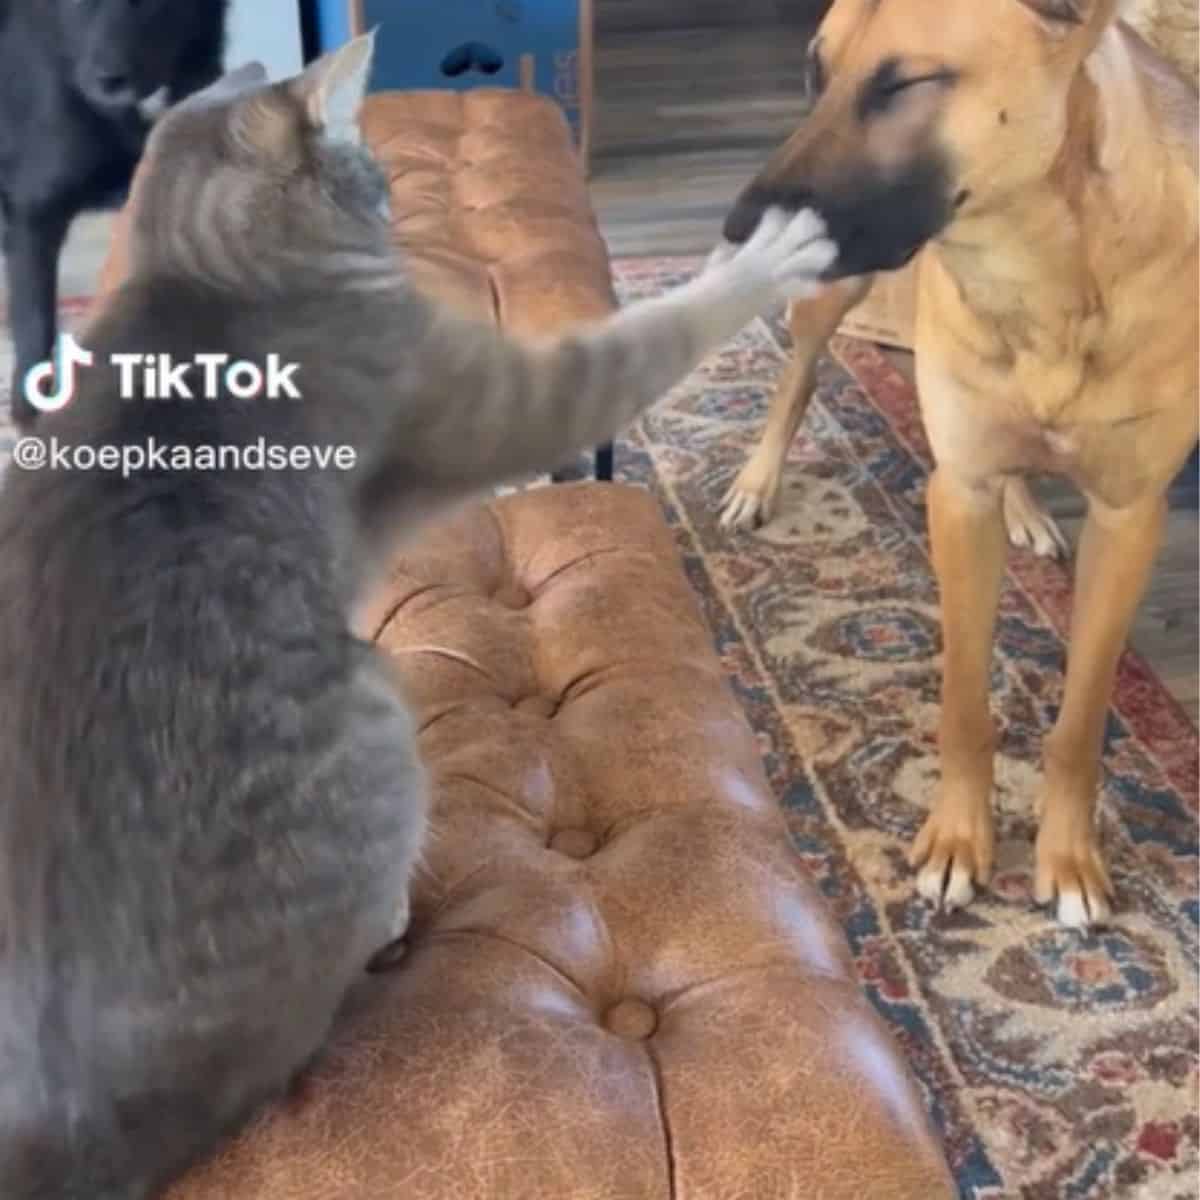 the cat touches the dog's muzzle with its paw